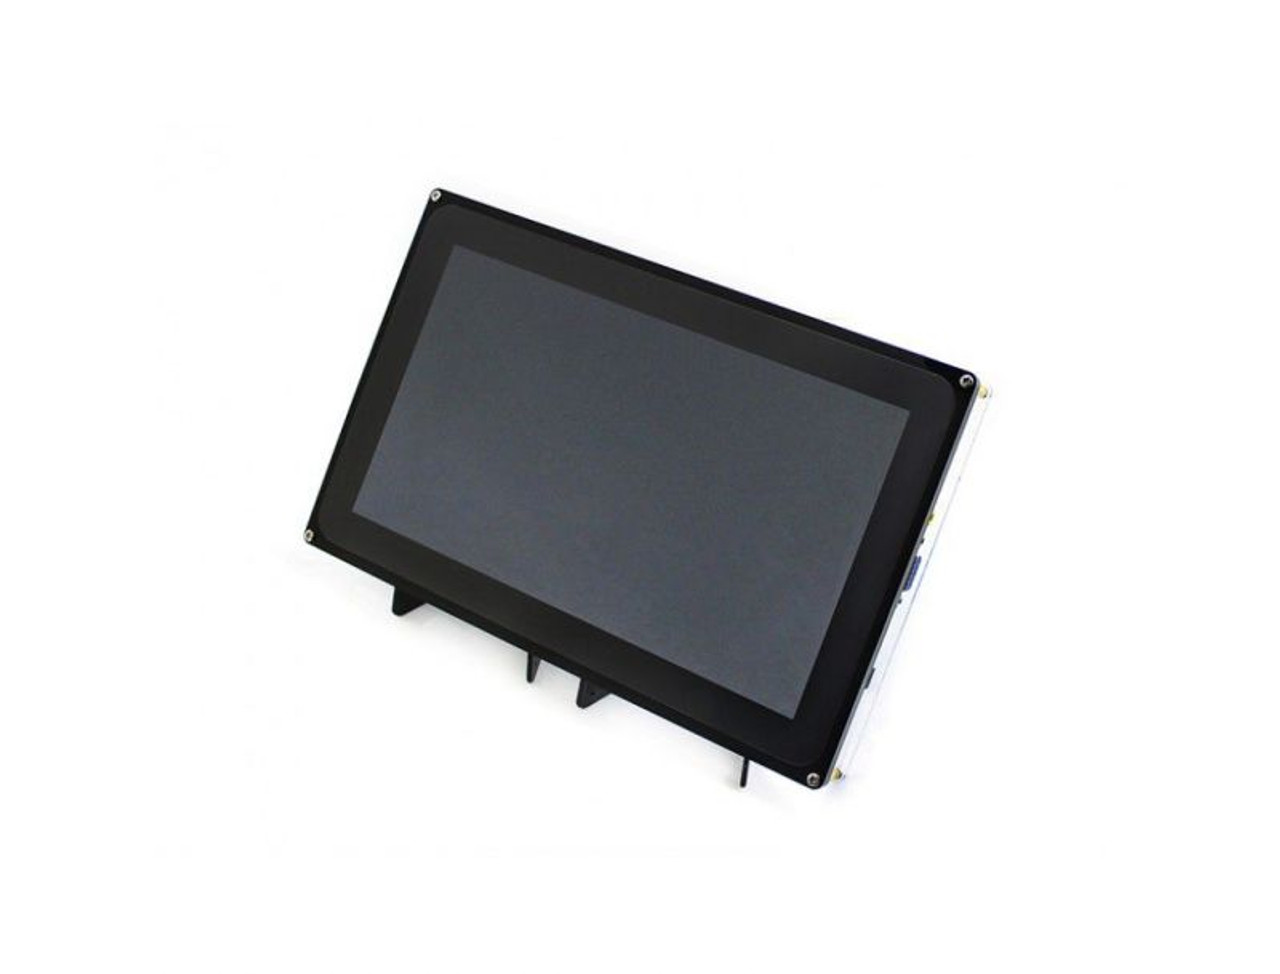 10.1inch Capacitive Touch Screen LCD with Case, Supports Multi mini-PCs  Waveshare Evelta